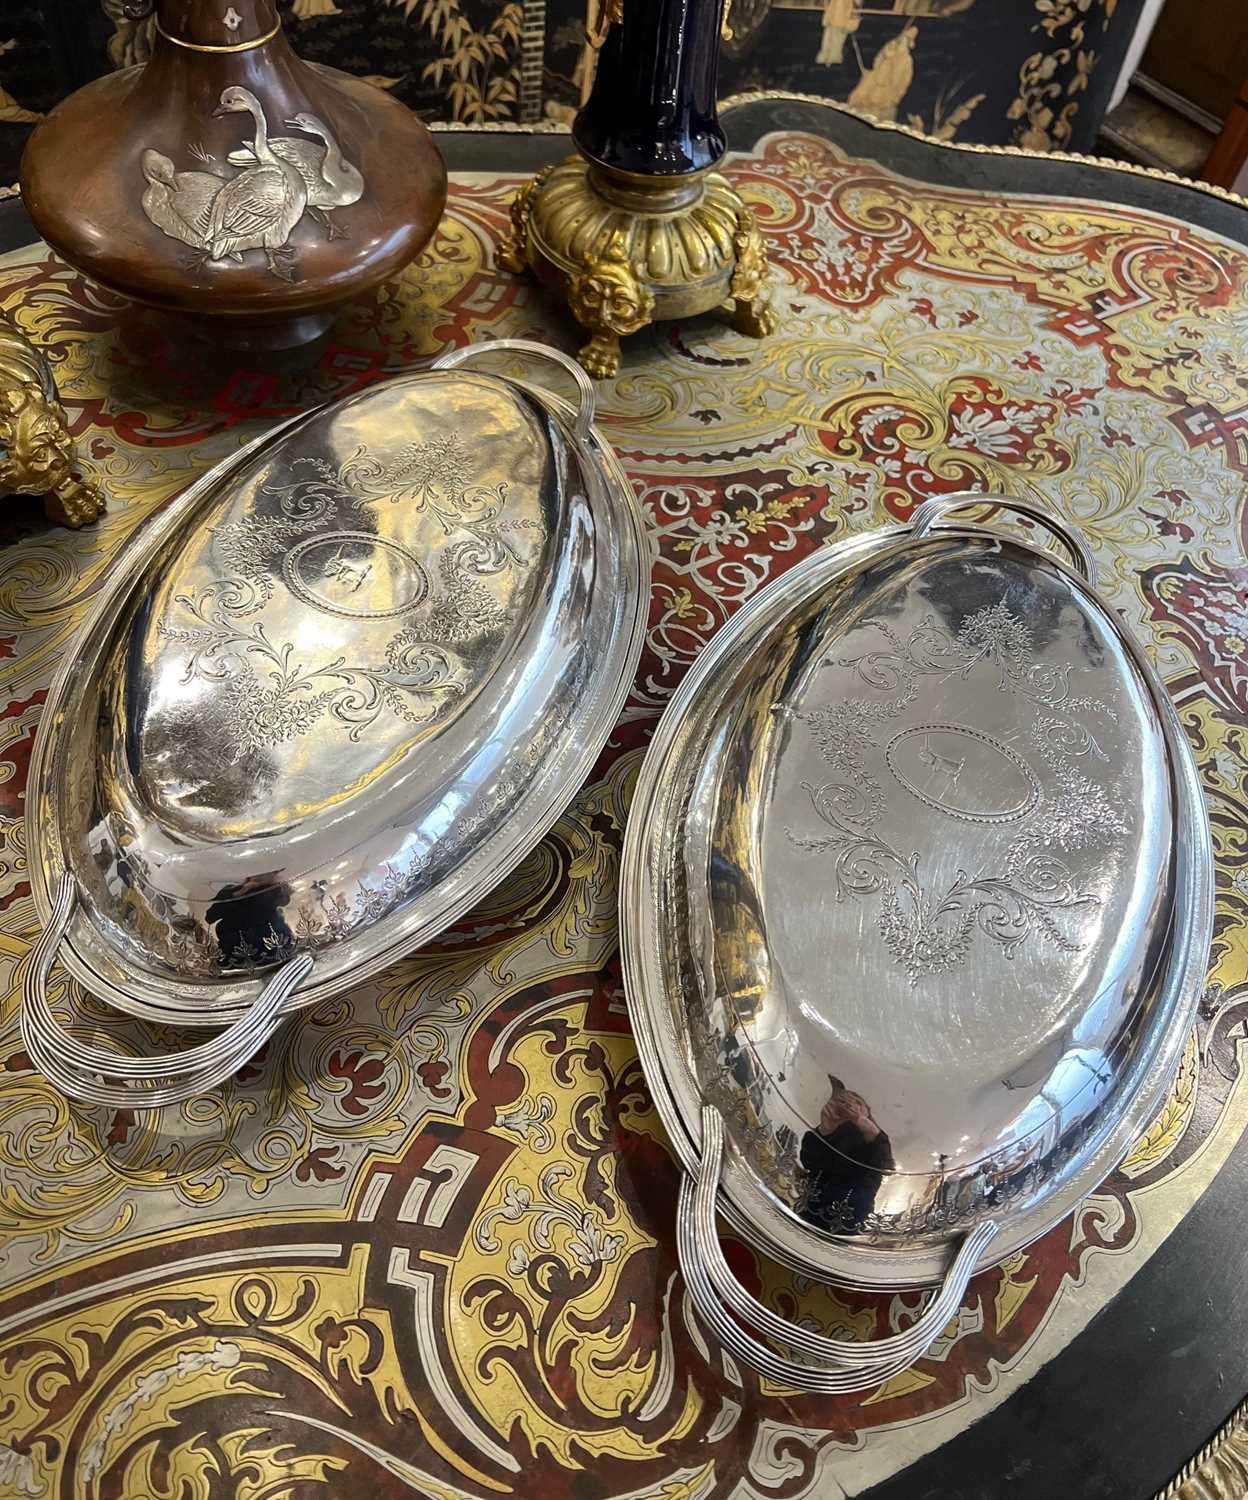 A PAIR OF 18TH CENTURY STERLING SILVER HASH DISHES BY PETER & ANN BATEMAN, 1798 - Image 3 of 10